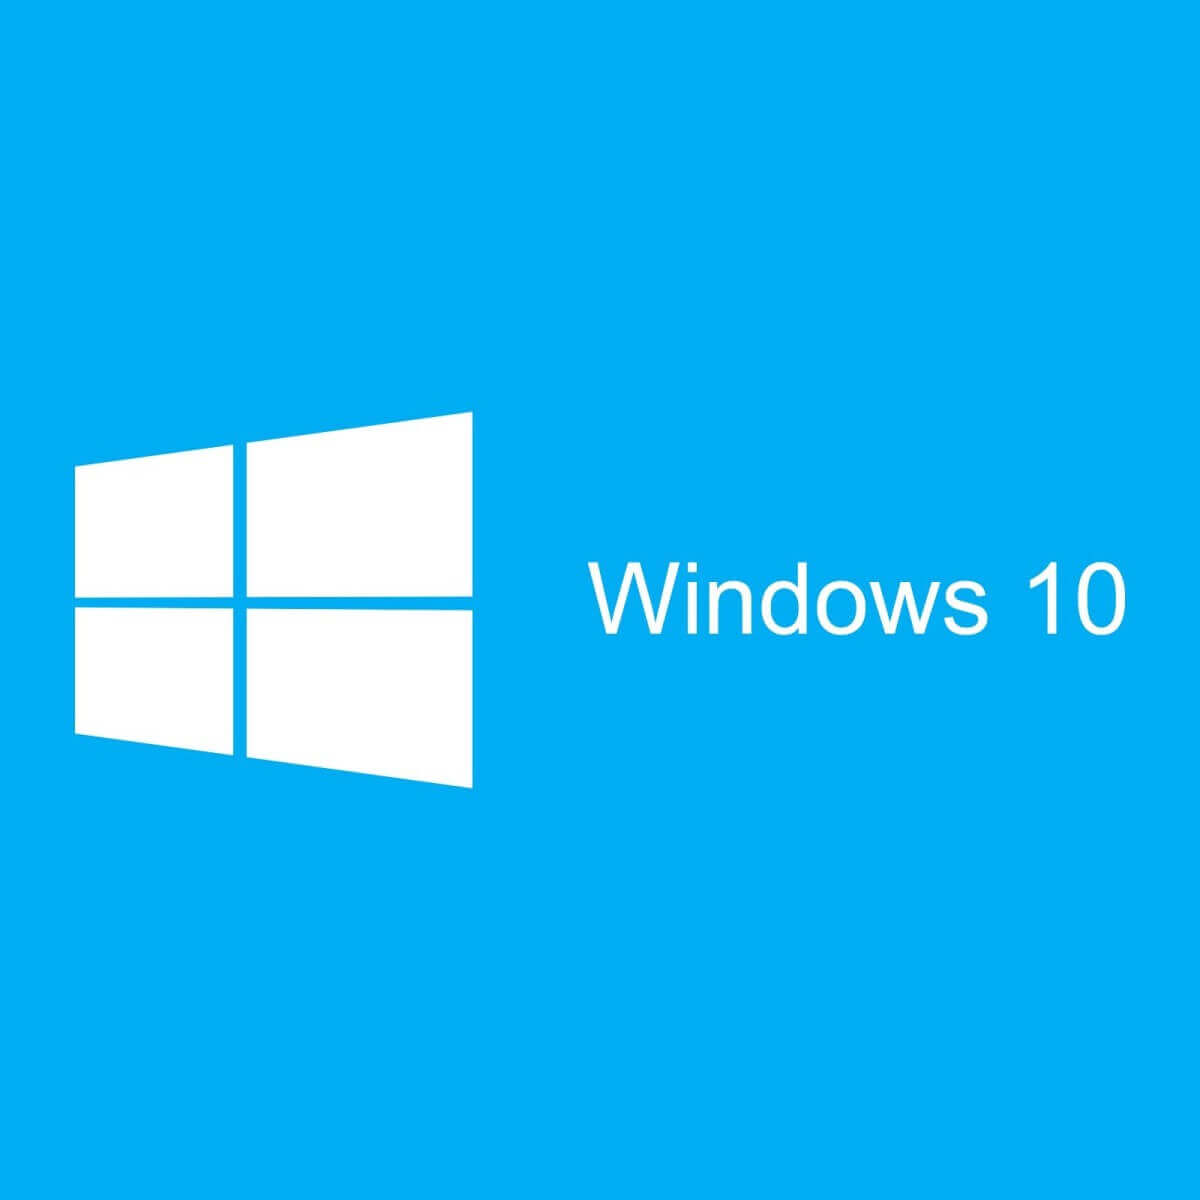 How to fix Windows 10 Major Update crashes and freezes